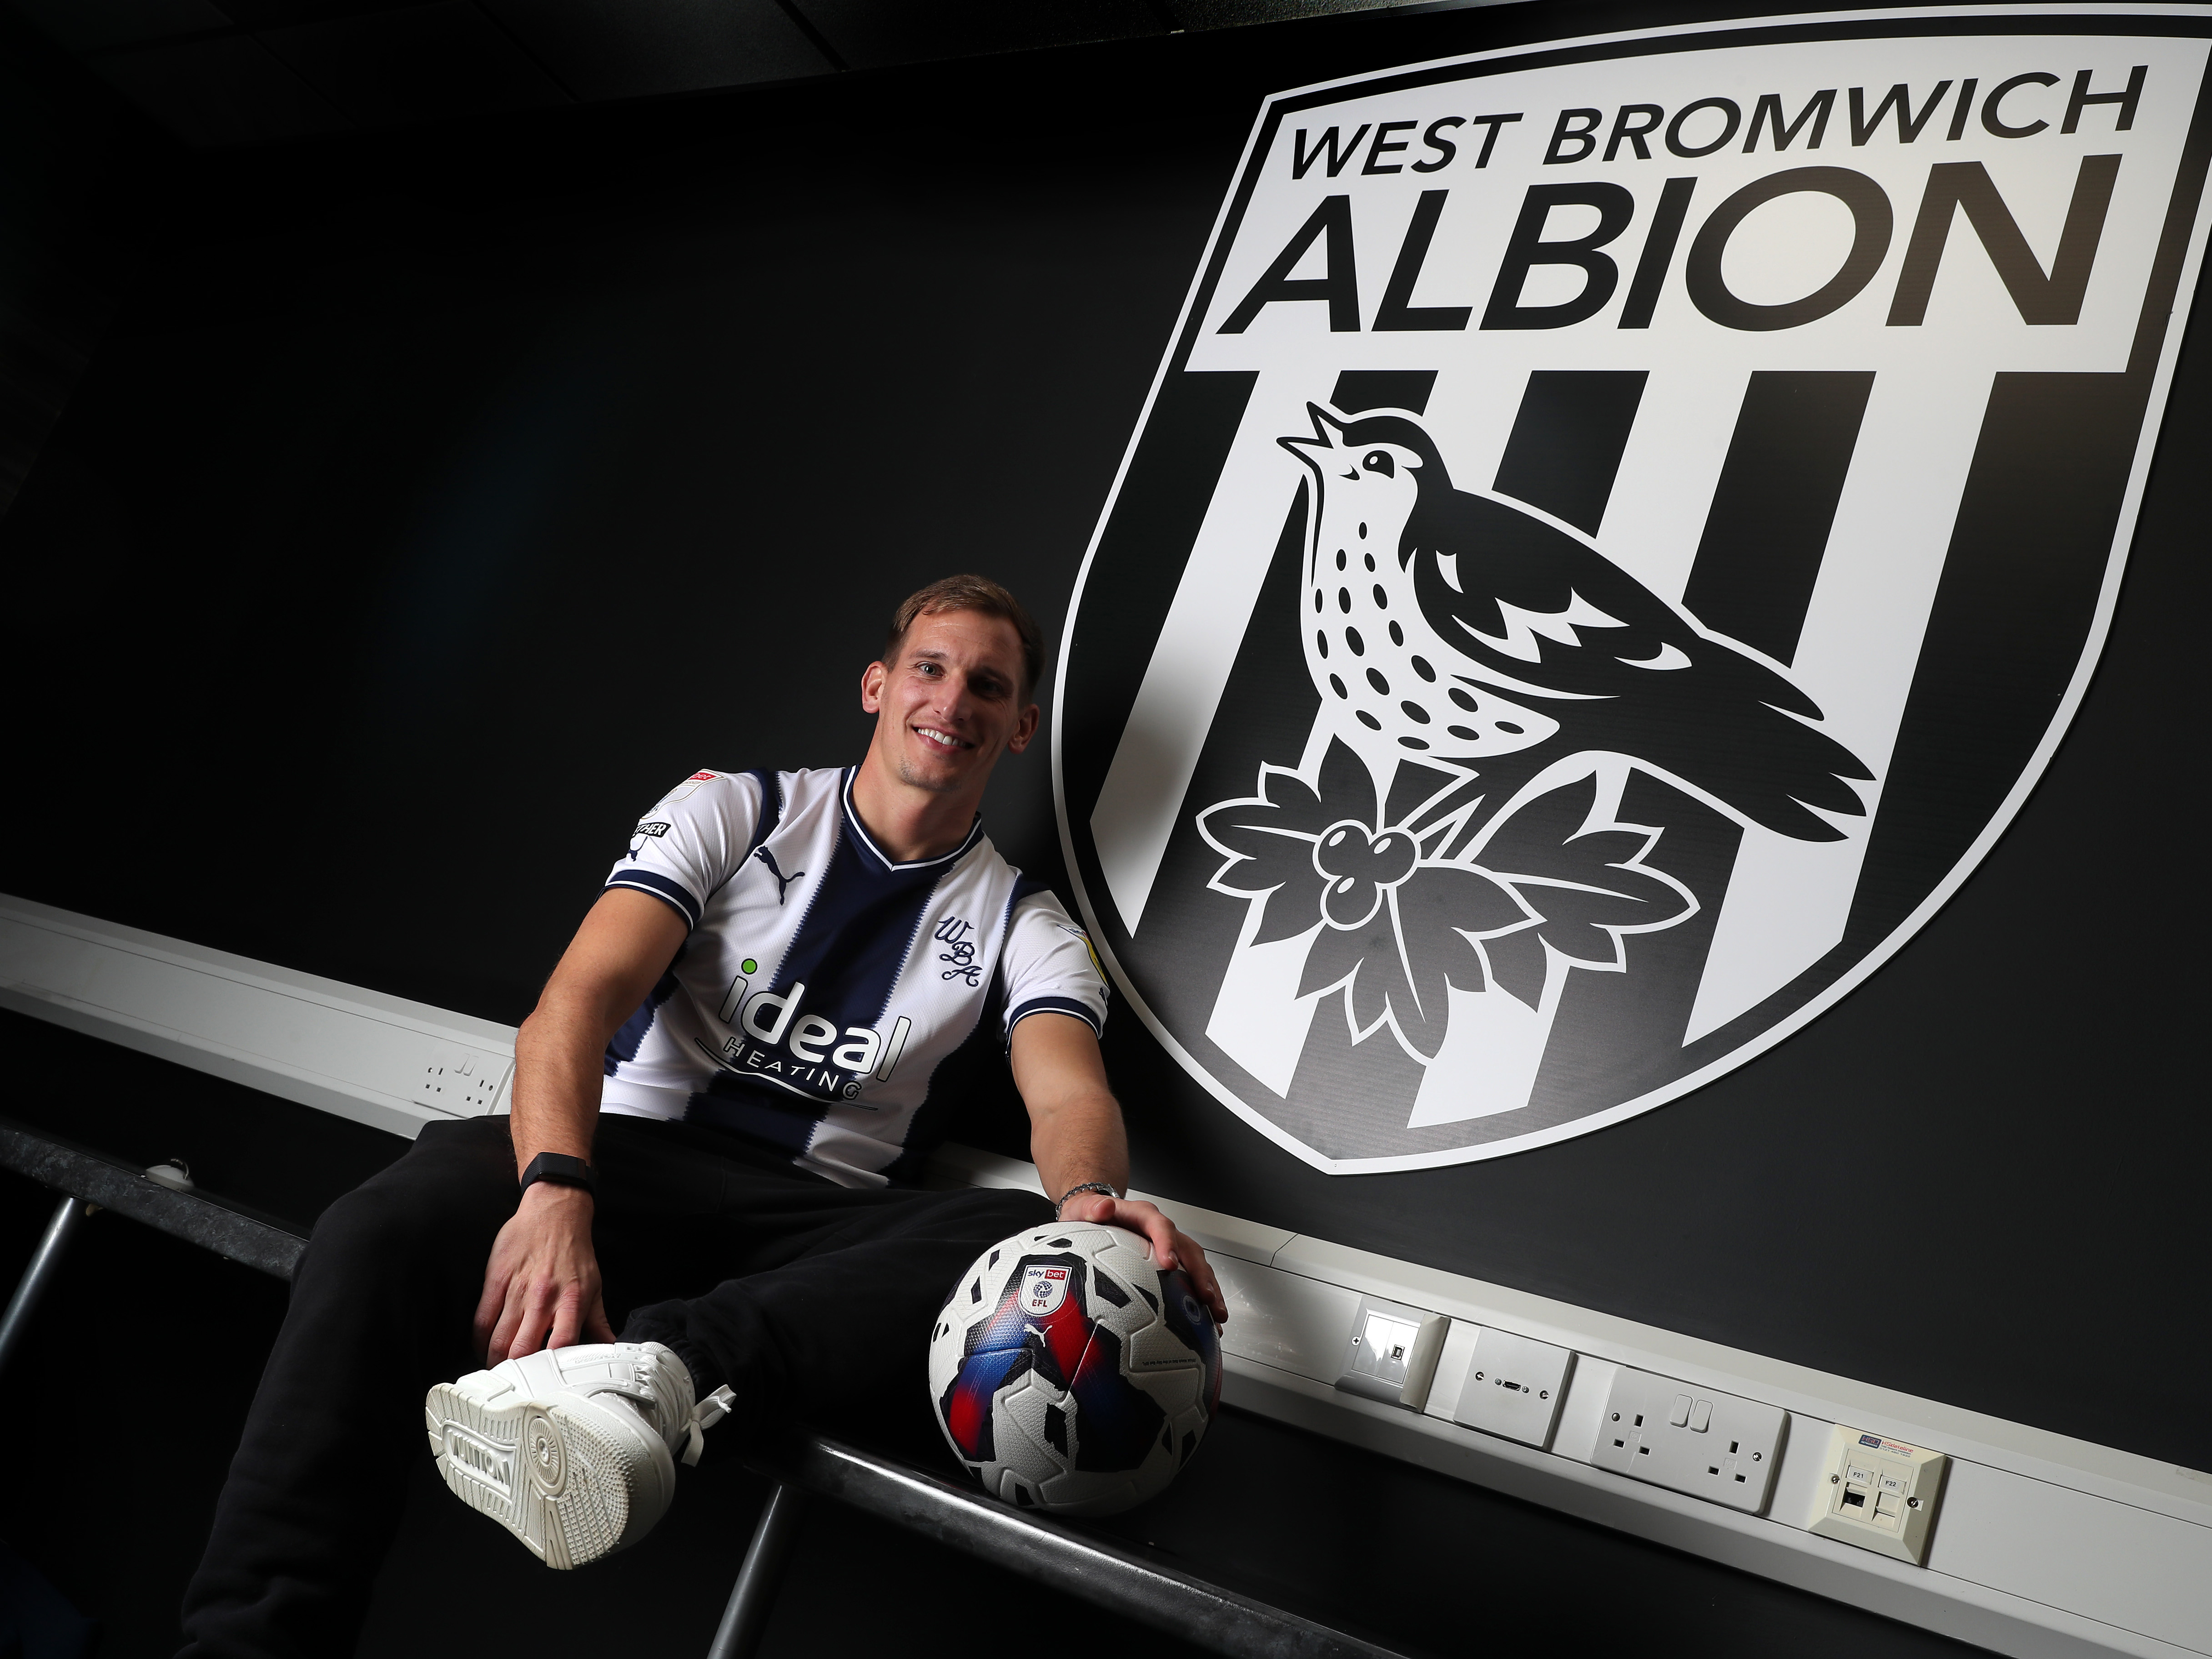 An image of Marc Albrighton posing next to an Albion badge